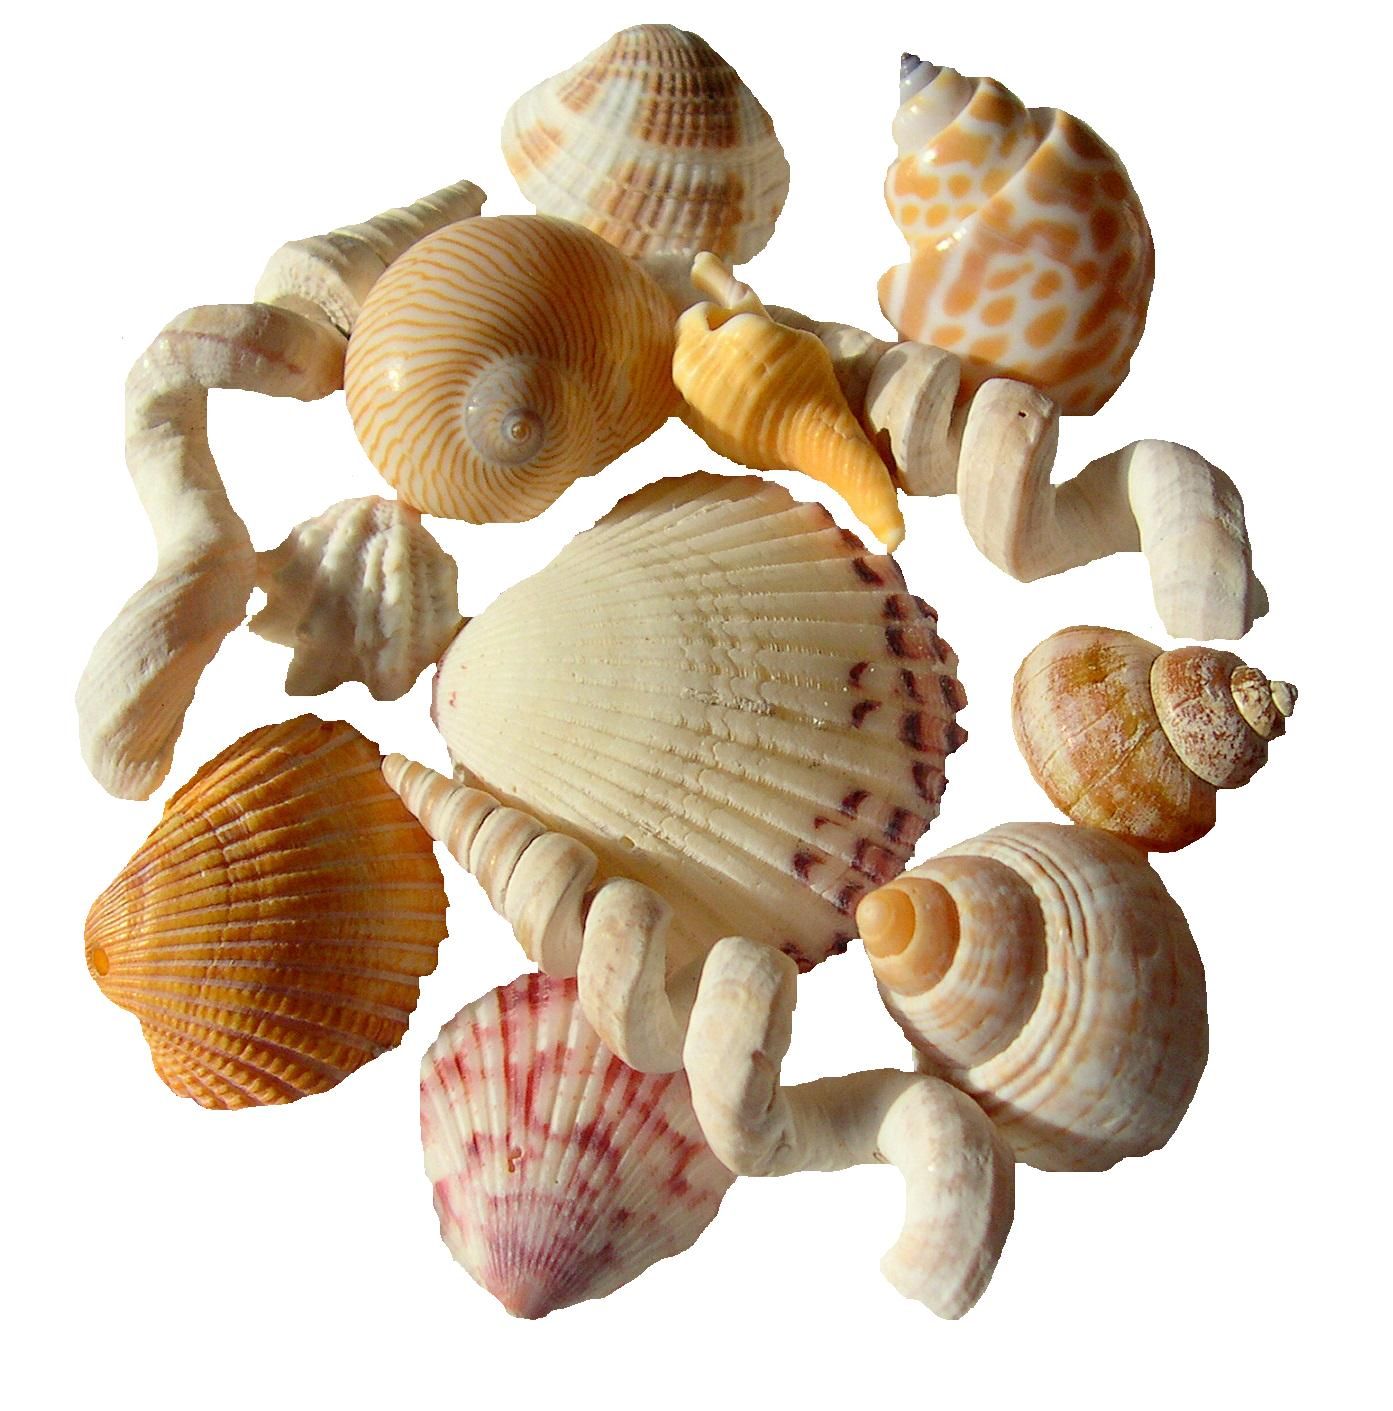 How to Clean Seashells Controversy | Seashells by Millhill -   Seashell Gallery